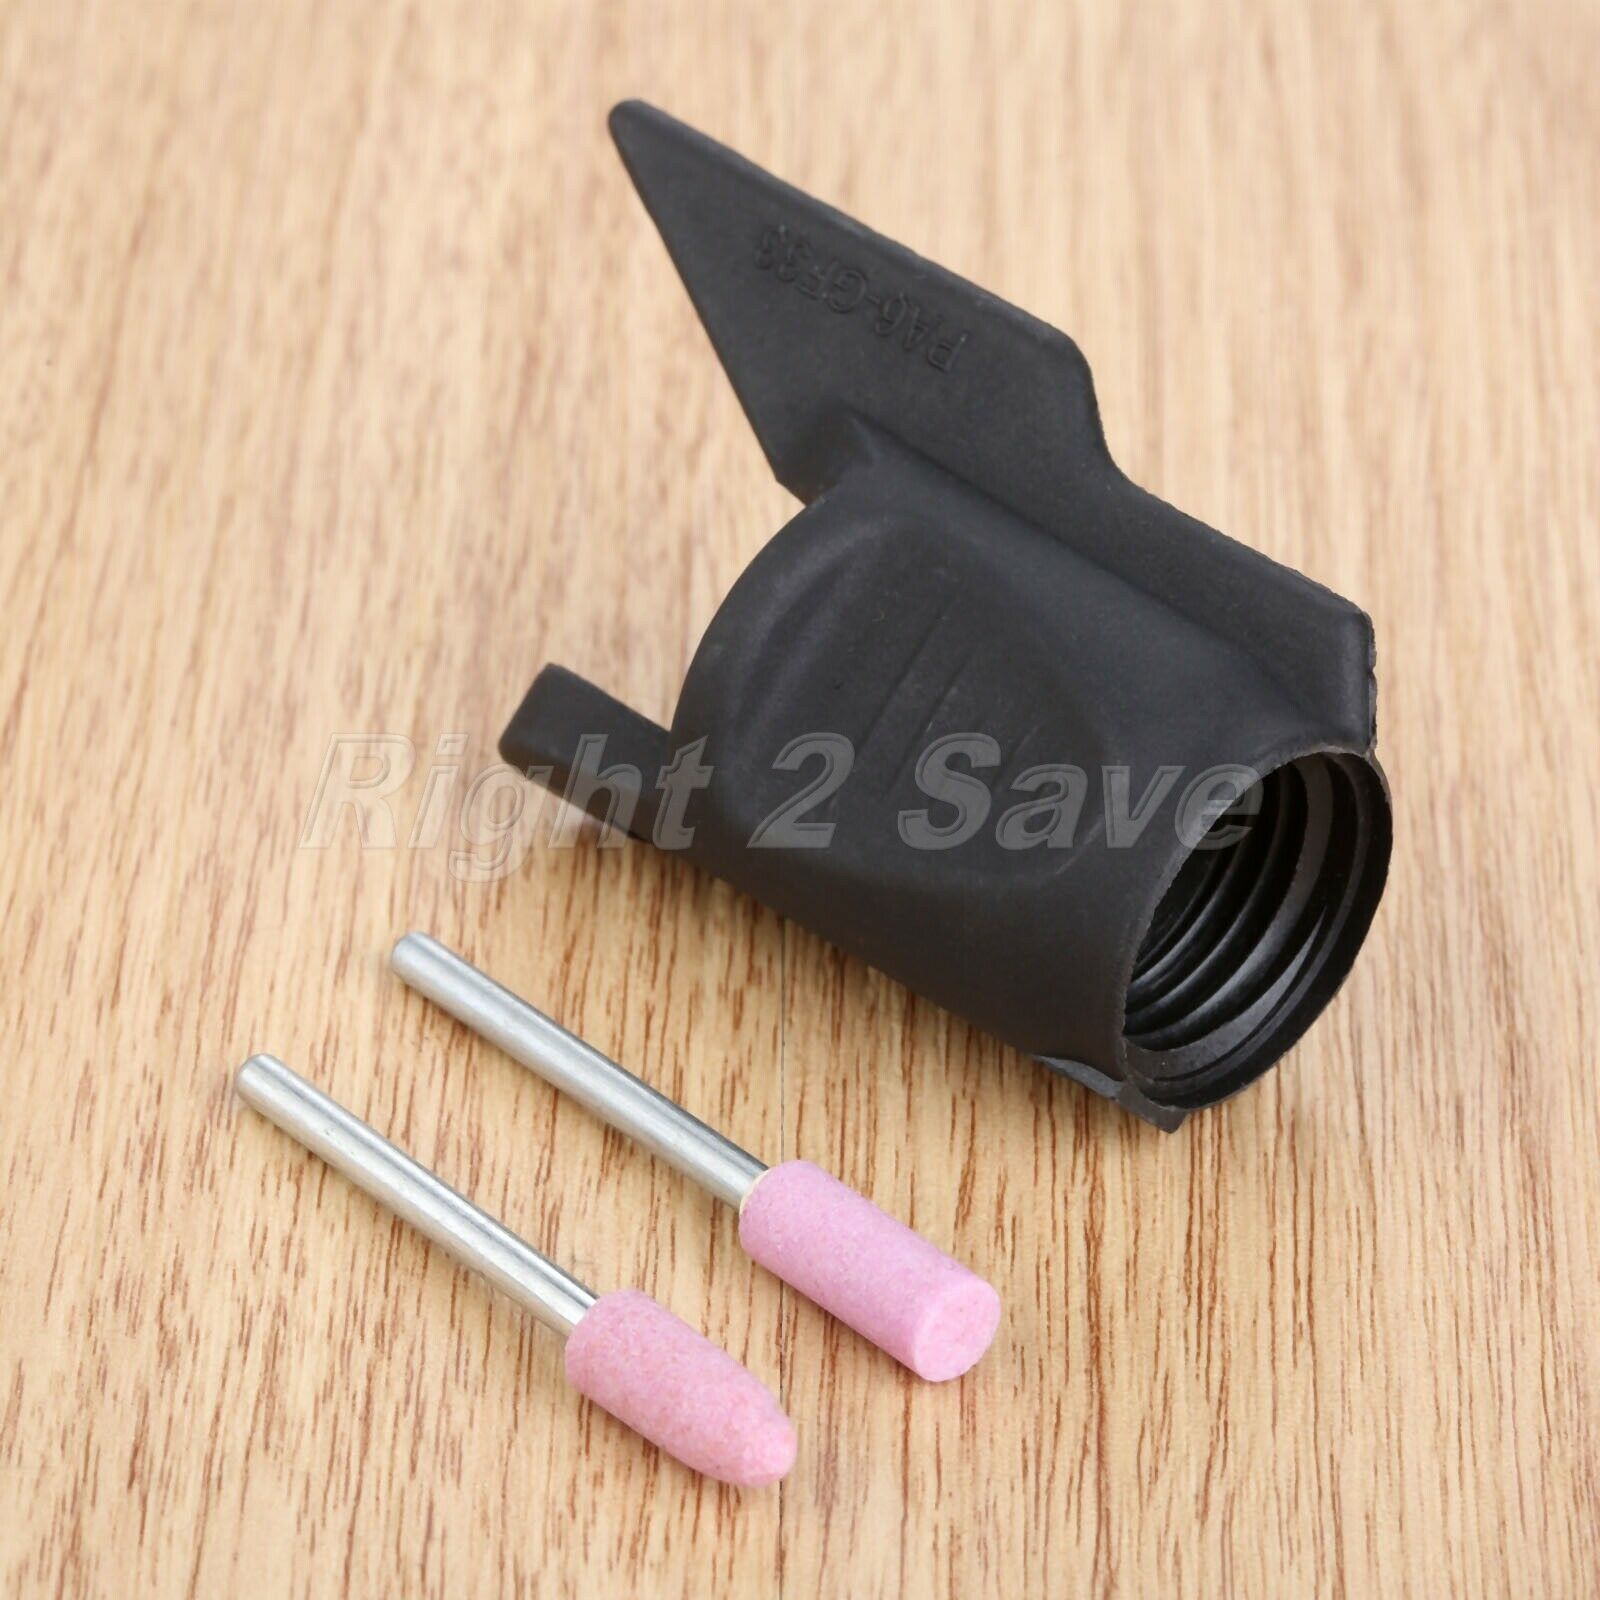 1 Set Saw Sharpening Attachment Guide Drill Adapter Rotary Sharpener Power Tool